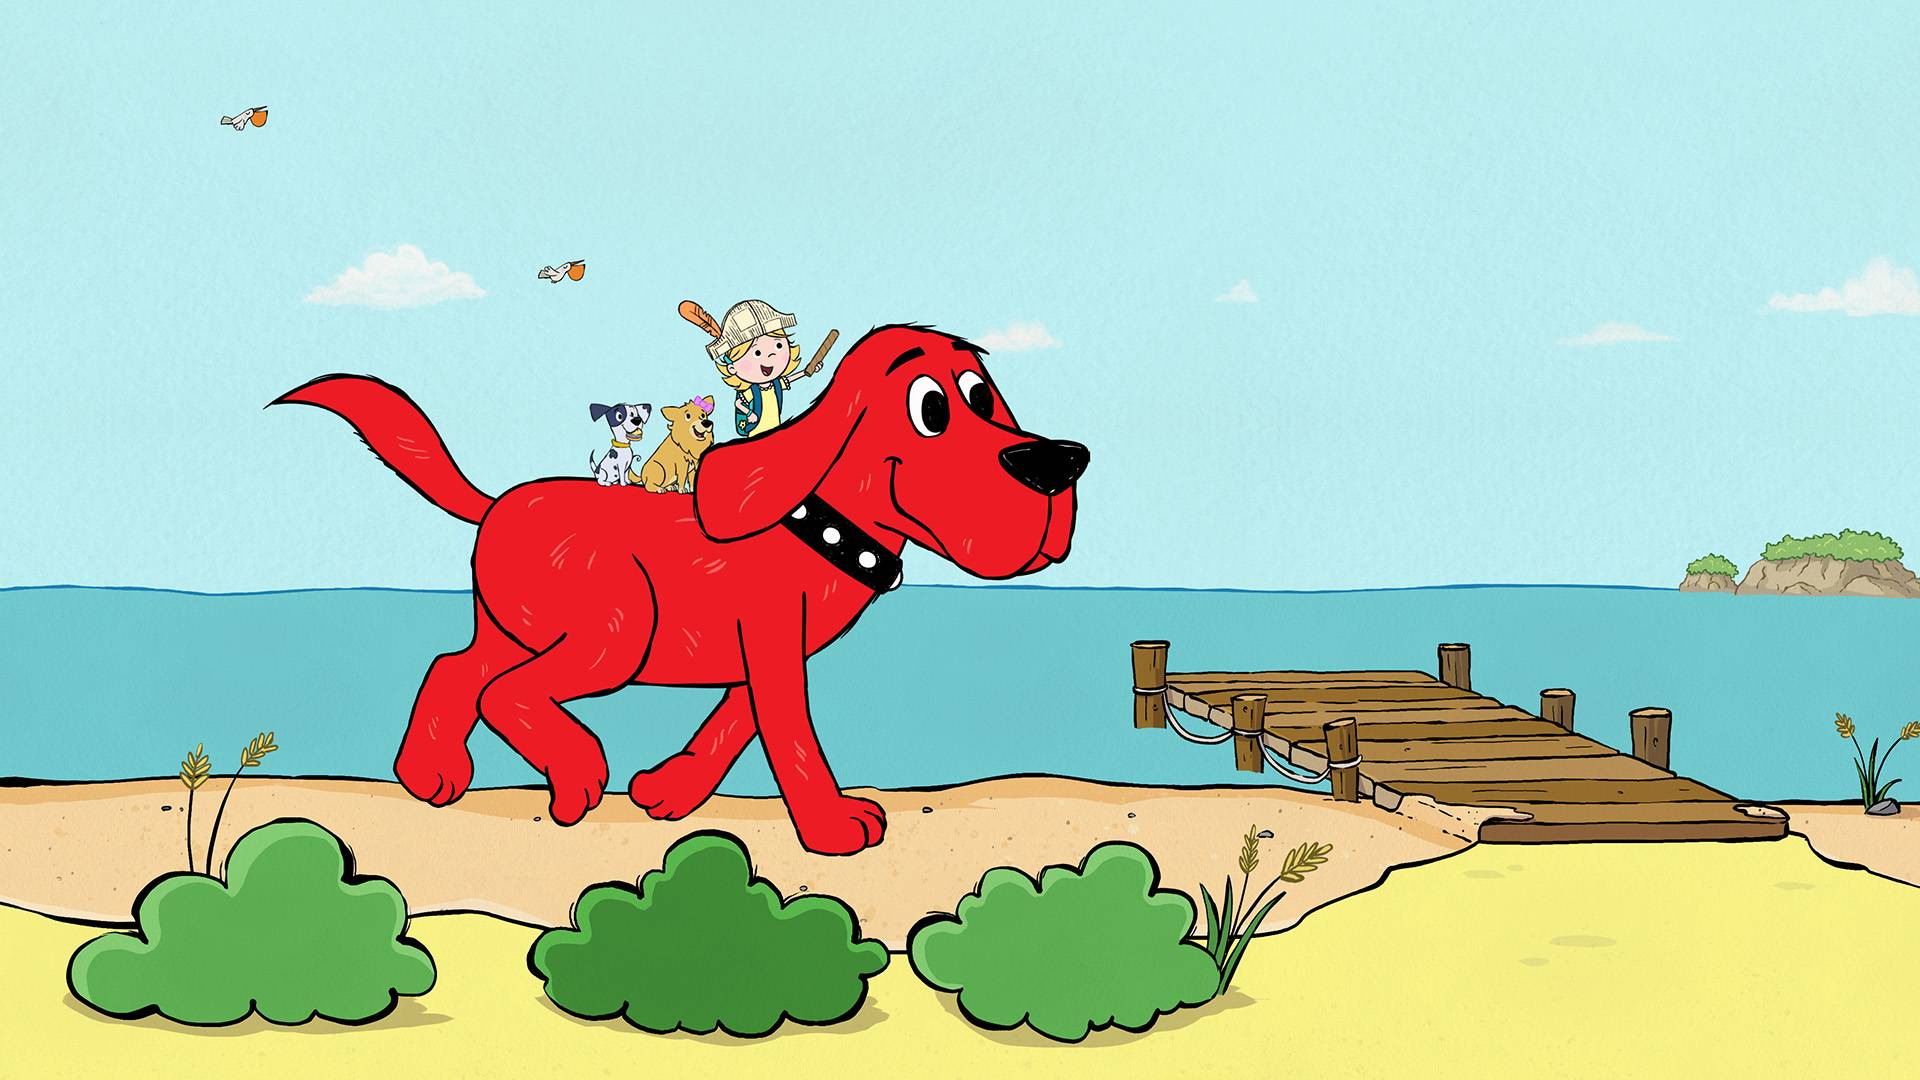 Clifford the Big Red Dog returns in new series